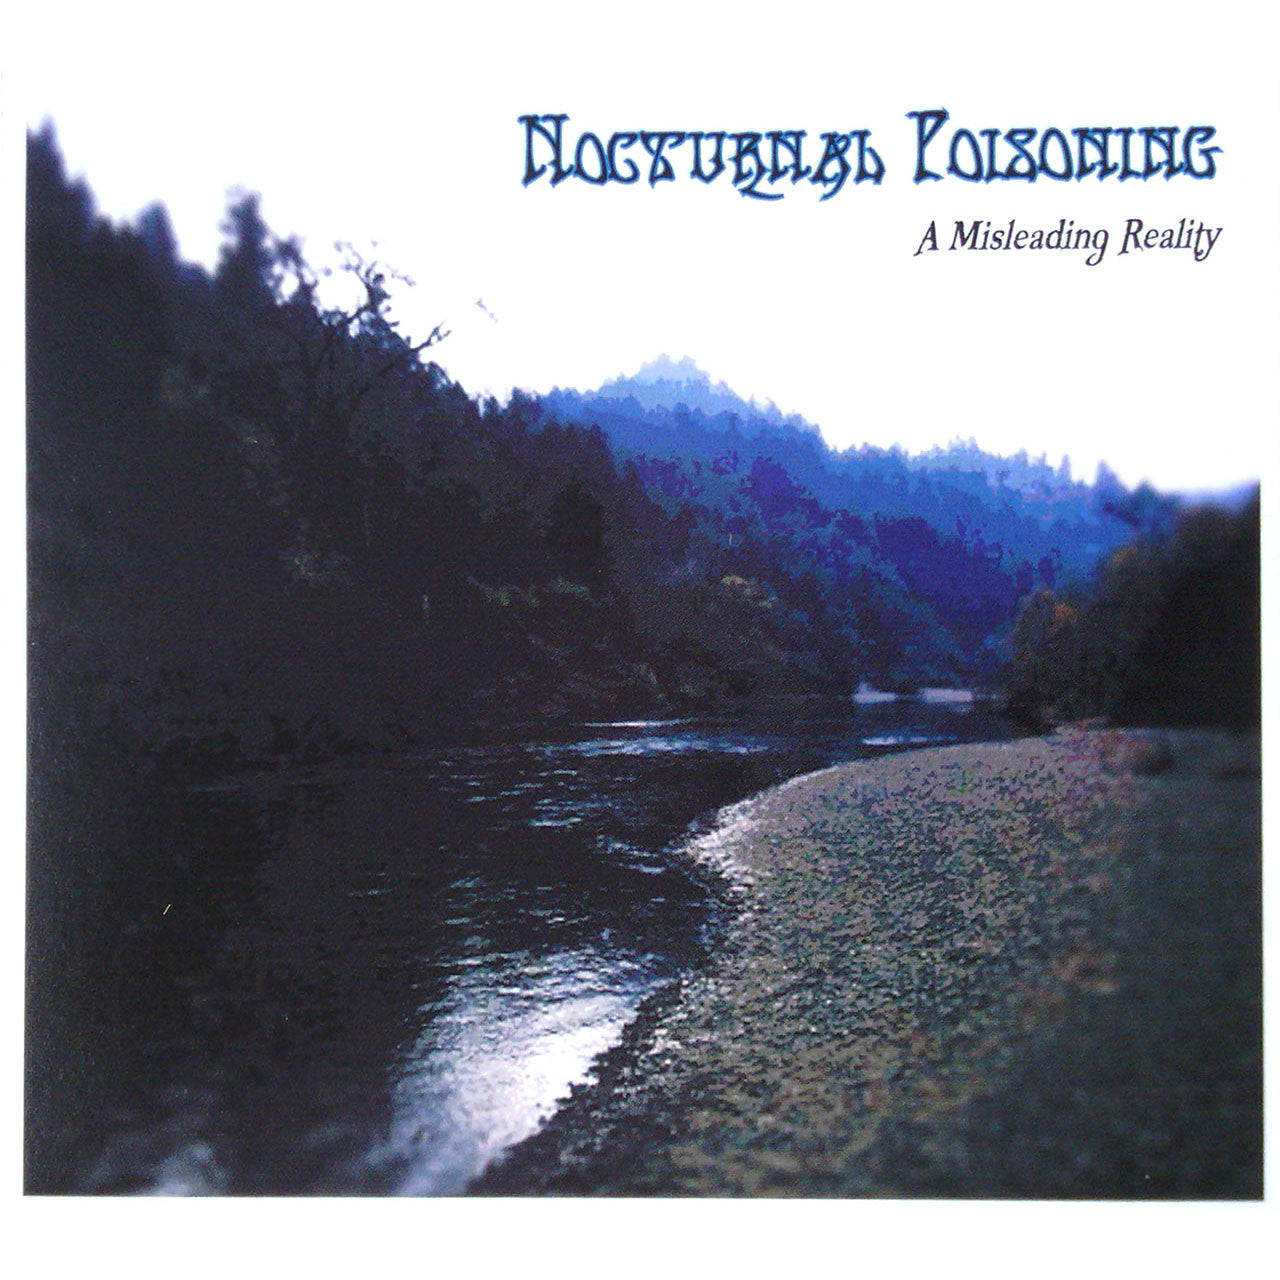 Nocturnal Poisoning - A Misleading Reality (Digipak CD)